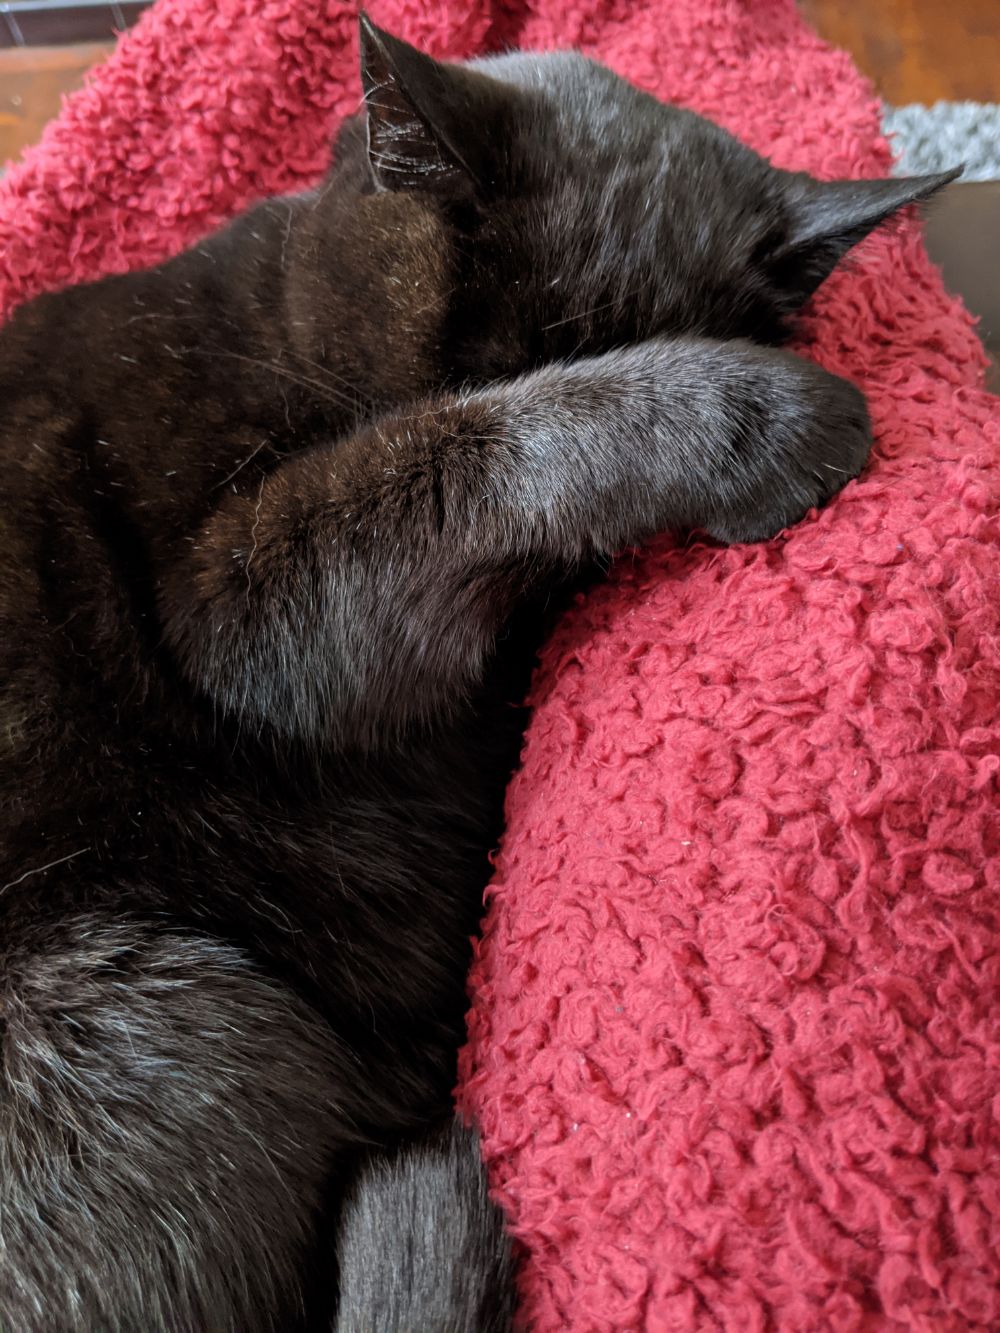 Black cat sleeping on a red blanket, lying between Jamie's outstretched legs, with one paw across his eyes to shield him from the light